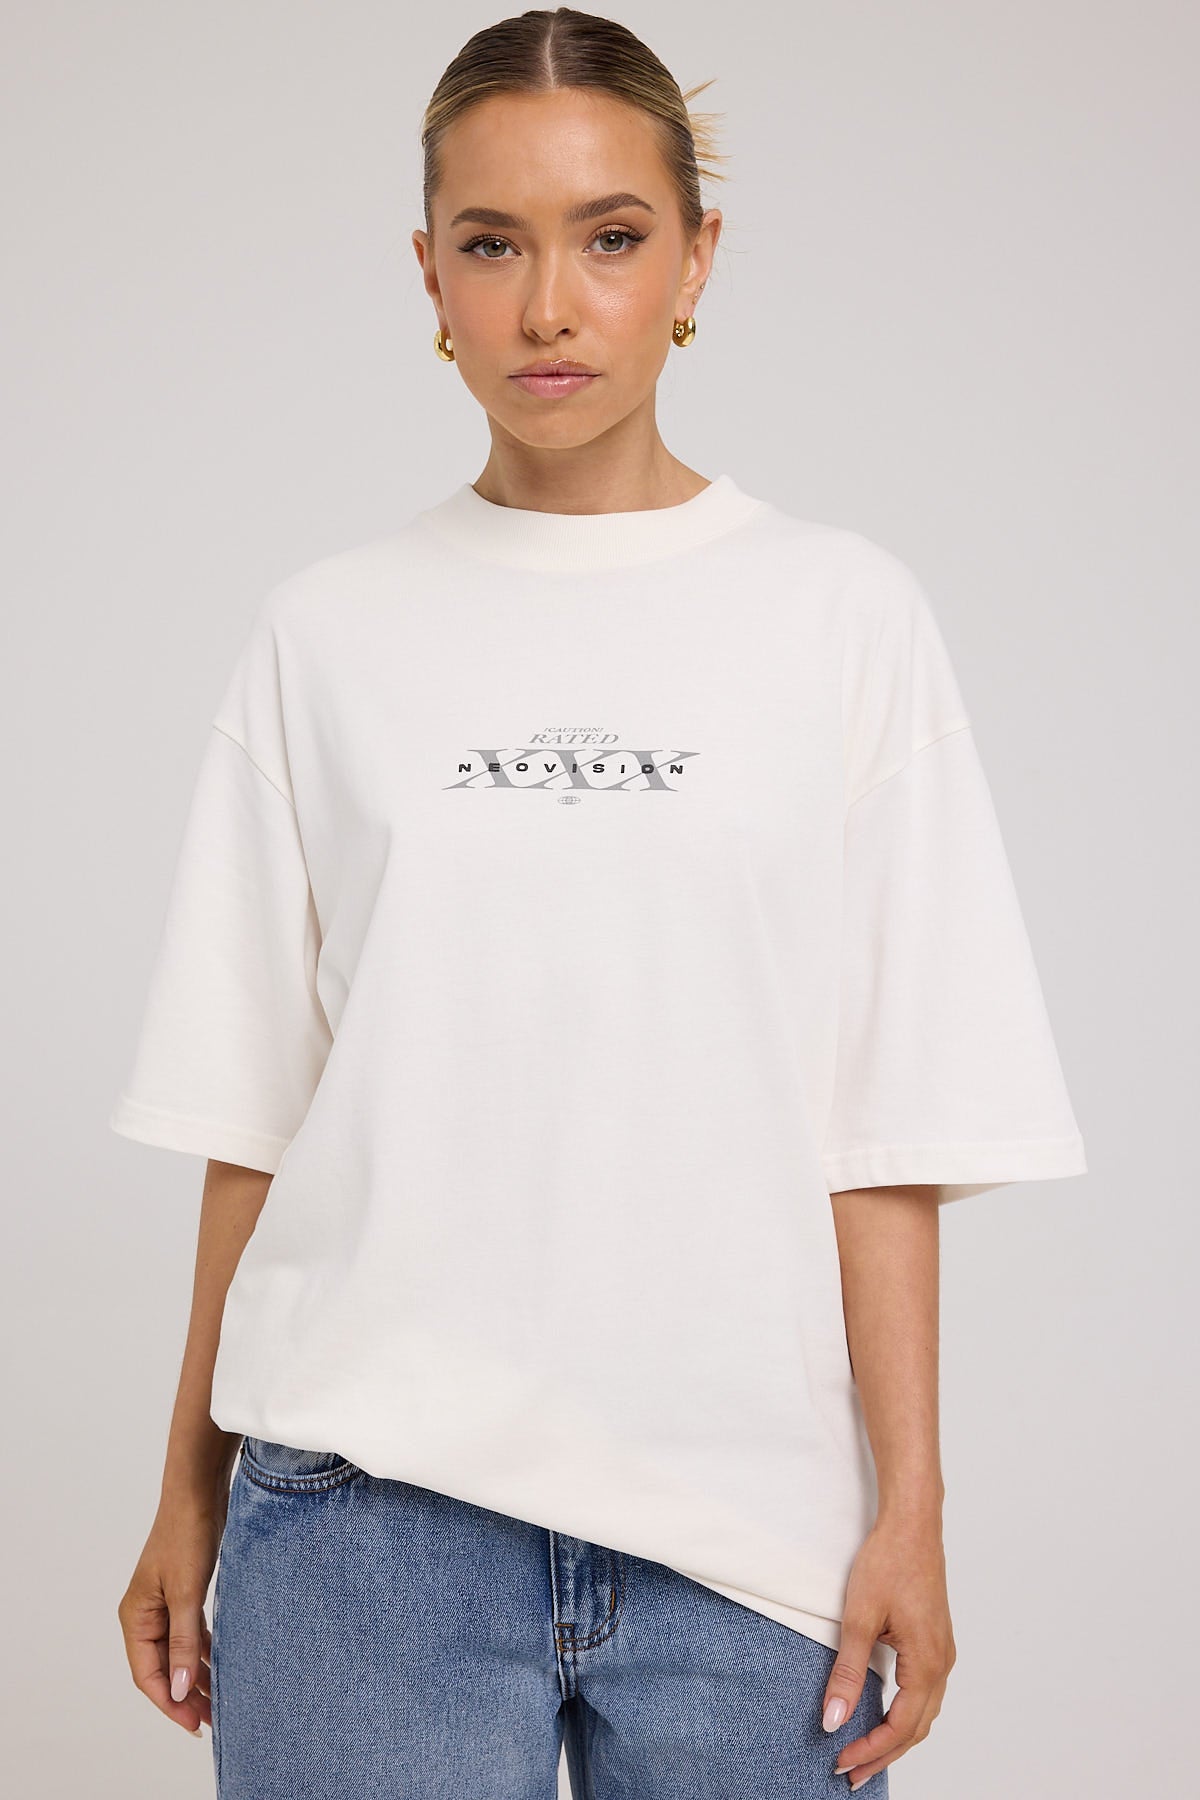 Neovision Rated Oversize Super Heavy Tee White